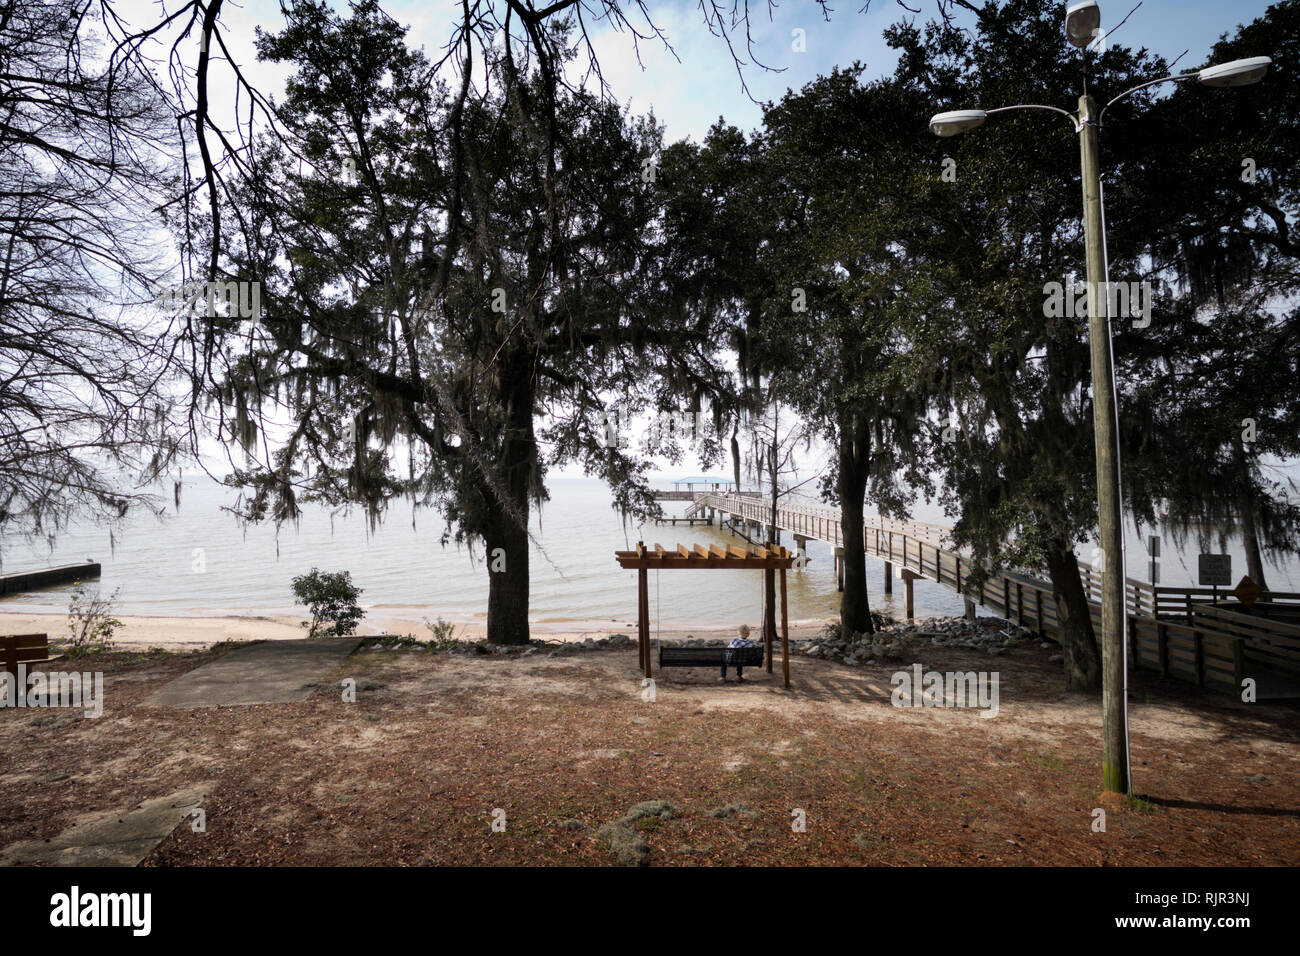 Public park overlooking Mobile Bay at Daphne, Alabma, USA Stock Photo